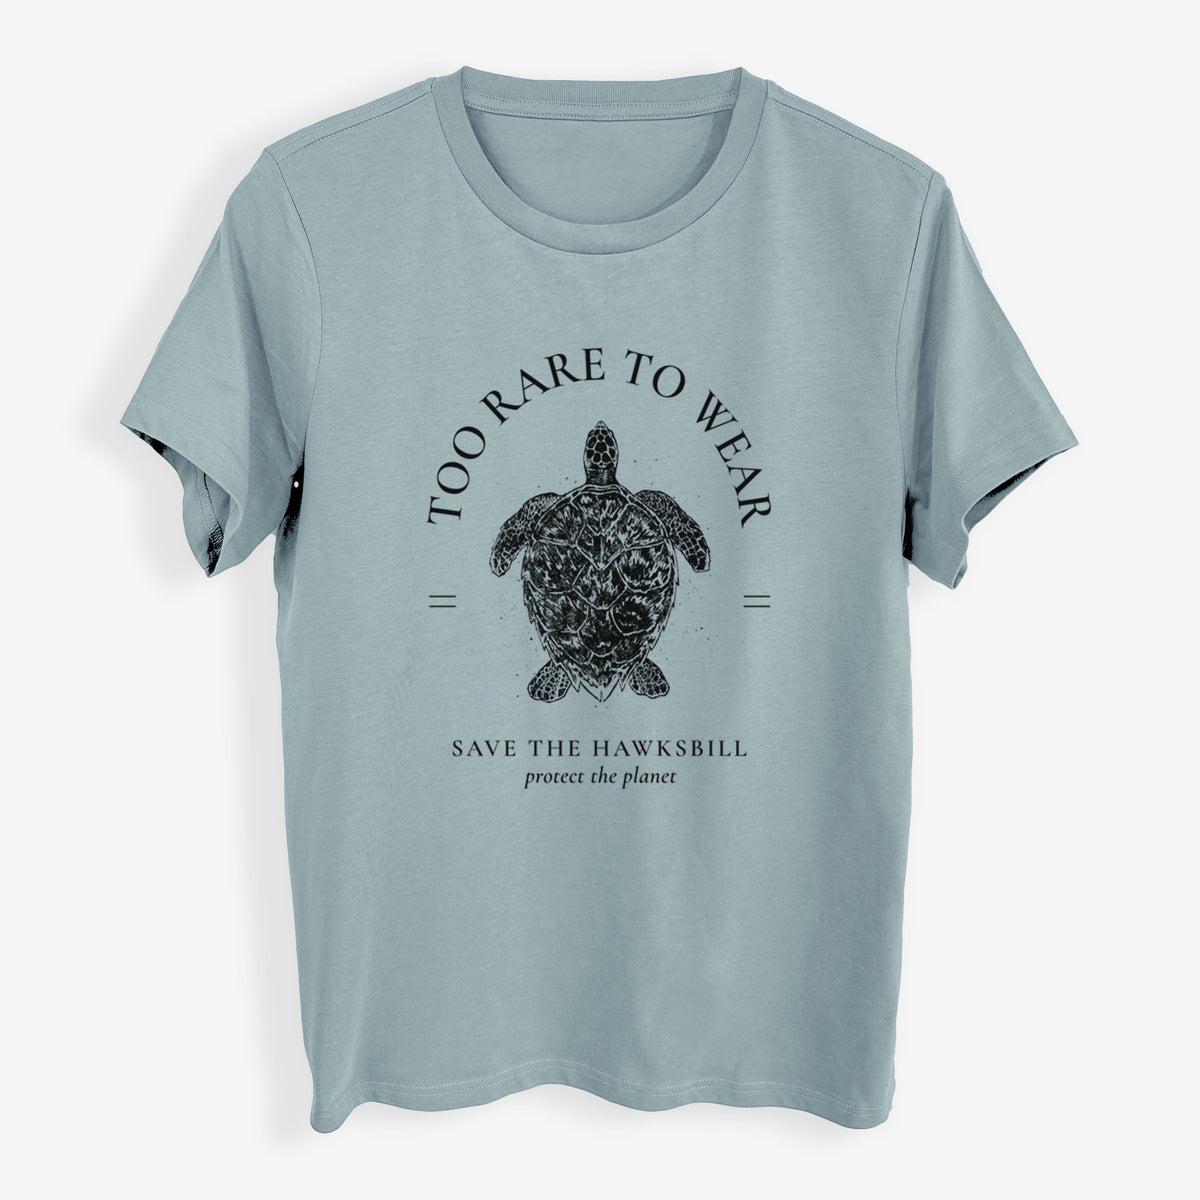 Too Rare to Wear - Save the Hawksbill - Womens Everyday Maple Tee